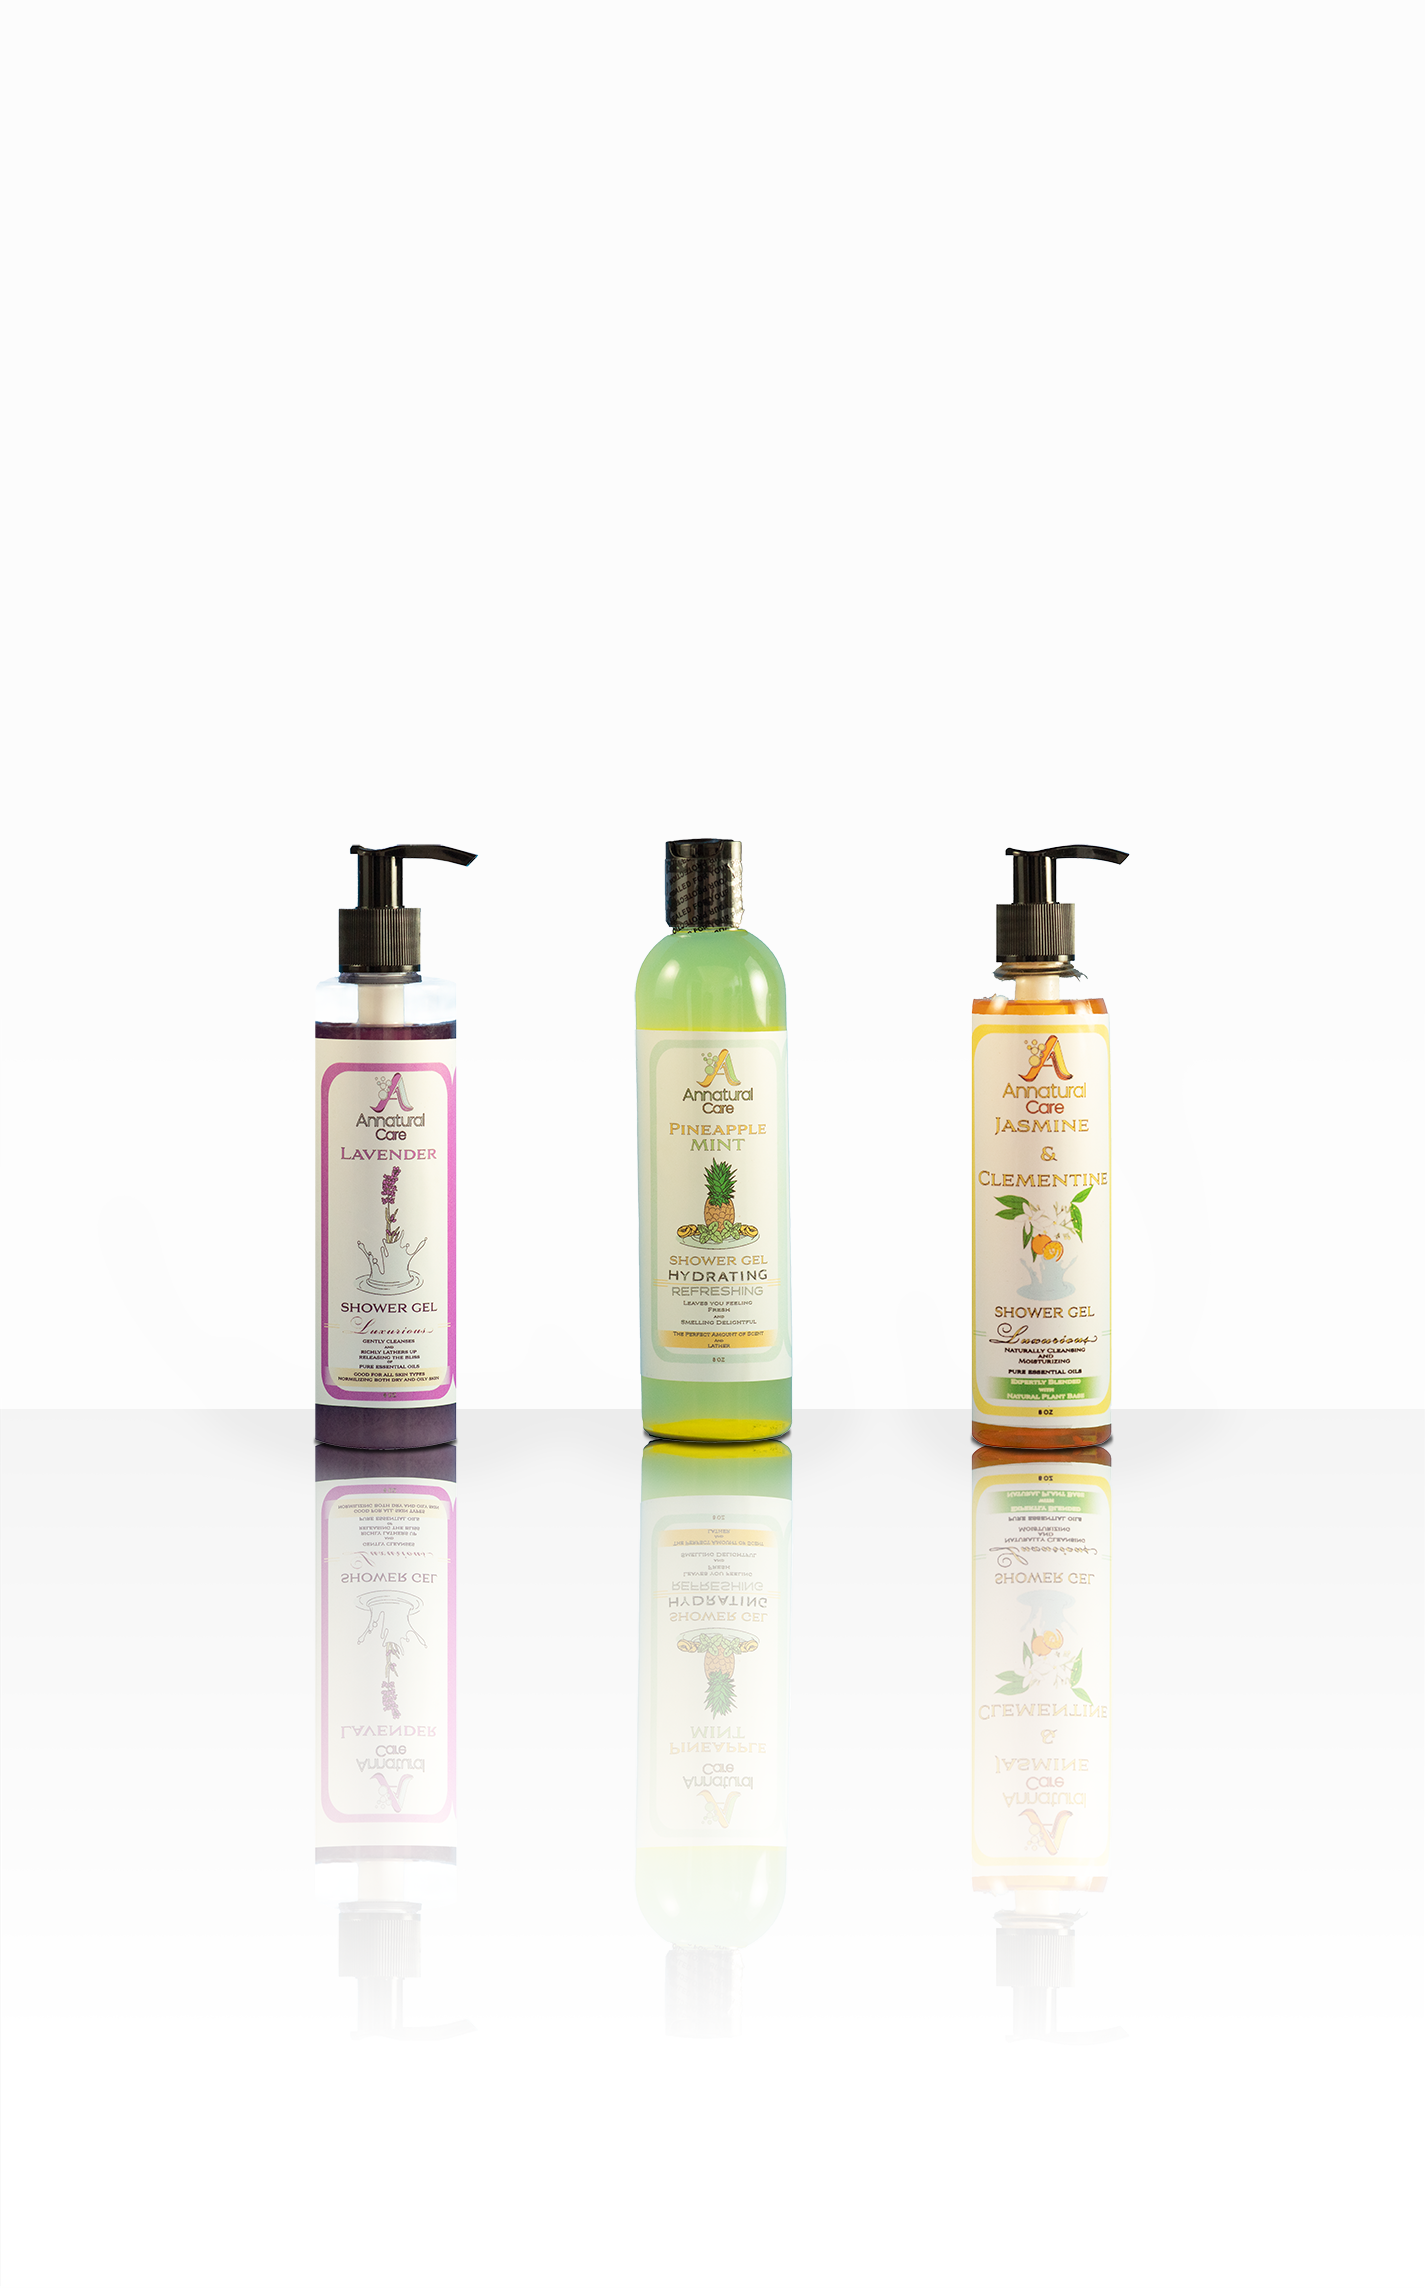 Annatural Care Shower Gel Lineup Reflective Surface Product Photography by Todd Osha